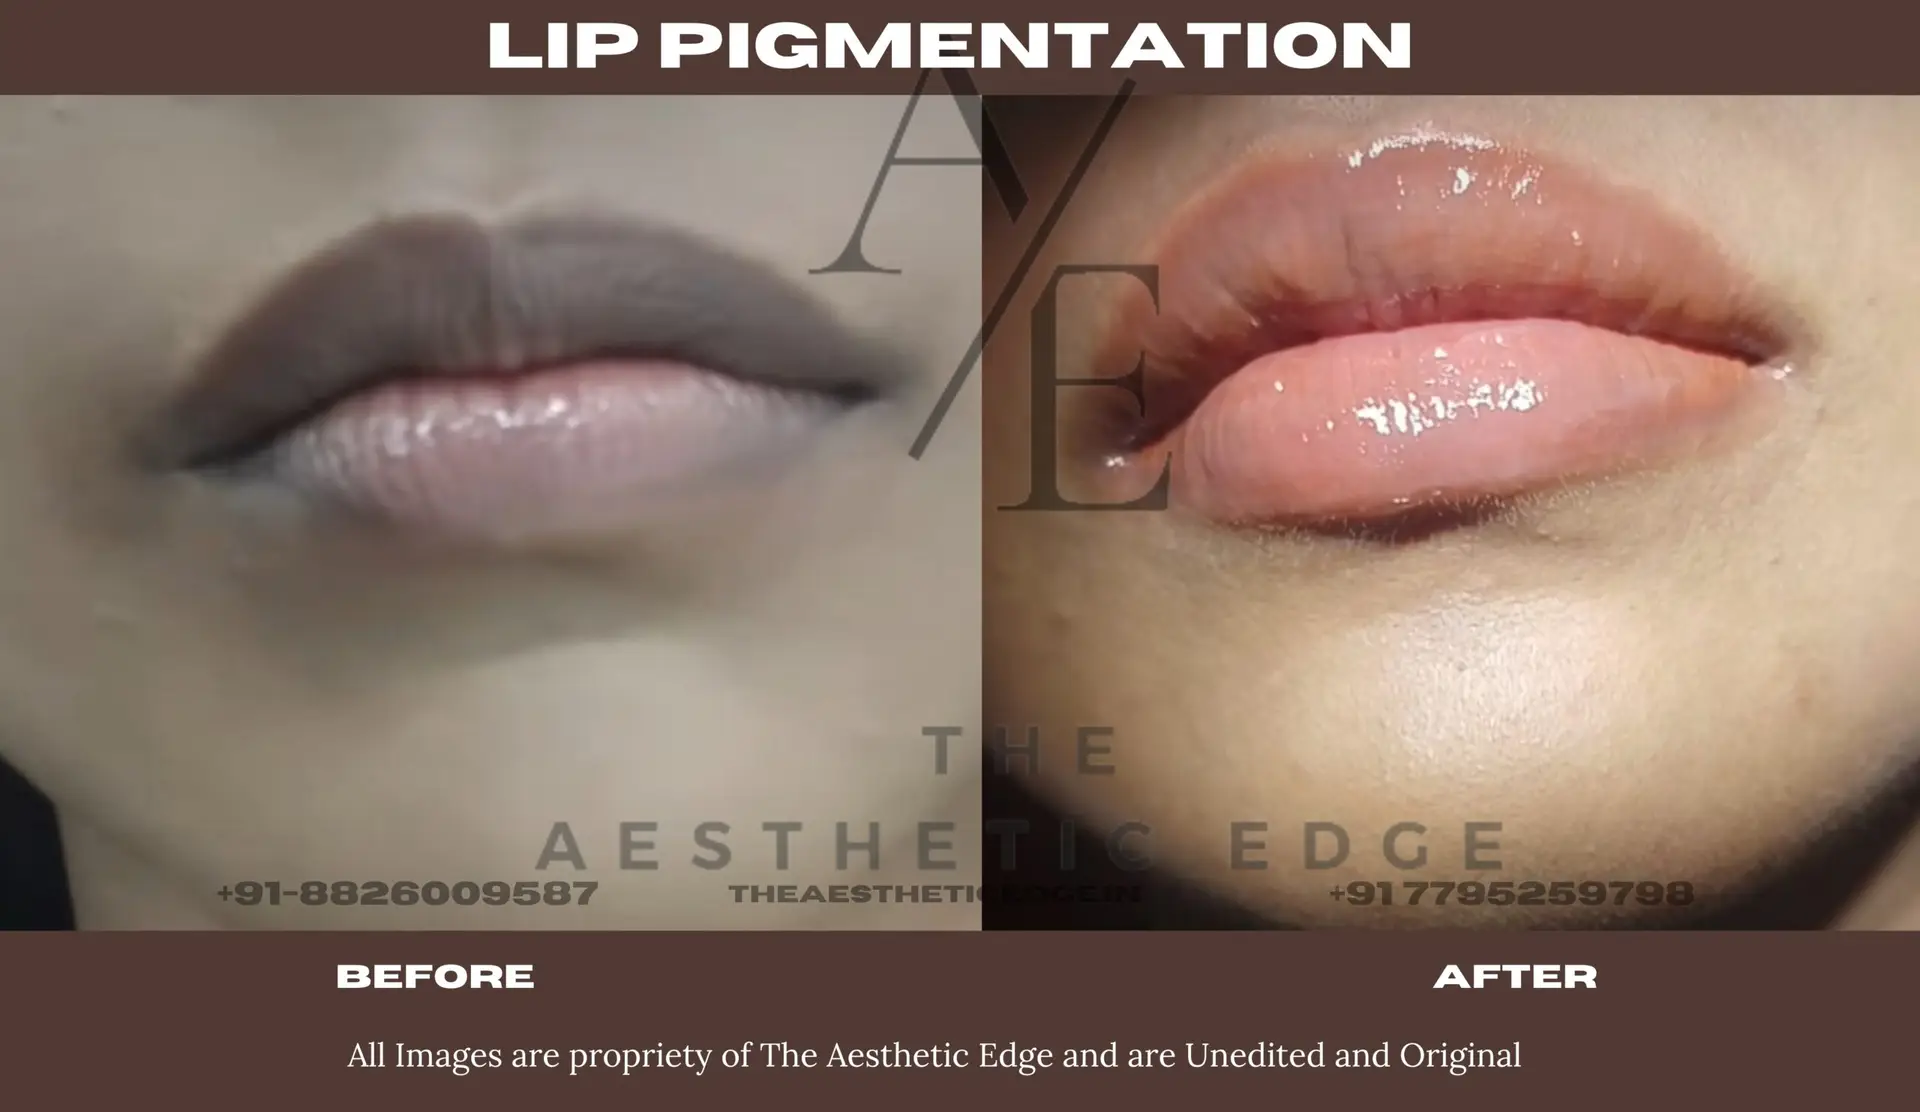 Lip pigmentation - Before After